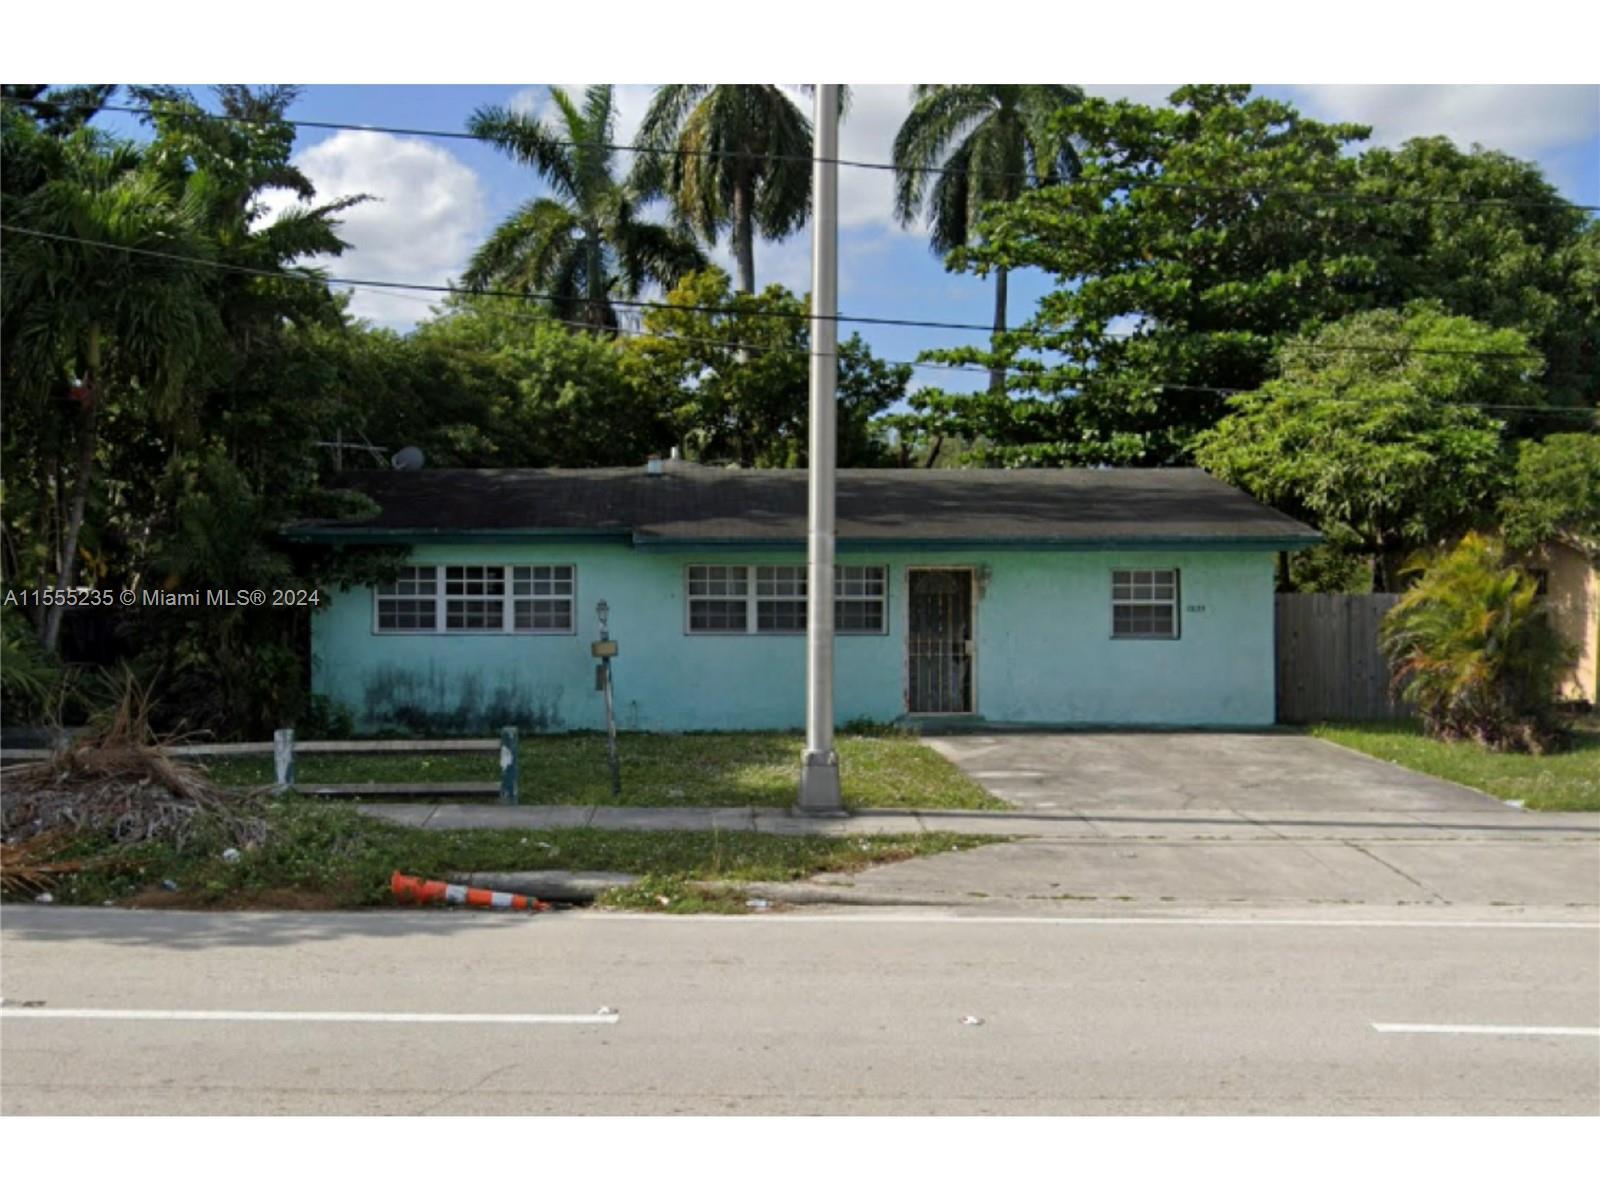 Photo of 13520 NW 17th Ave in Opa-Locka, FL